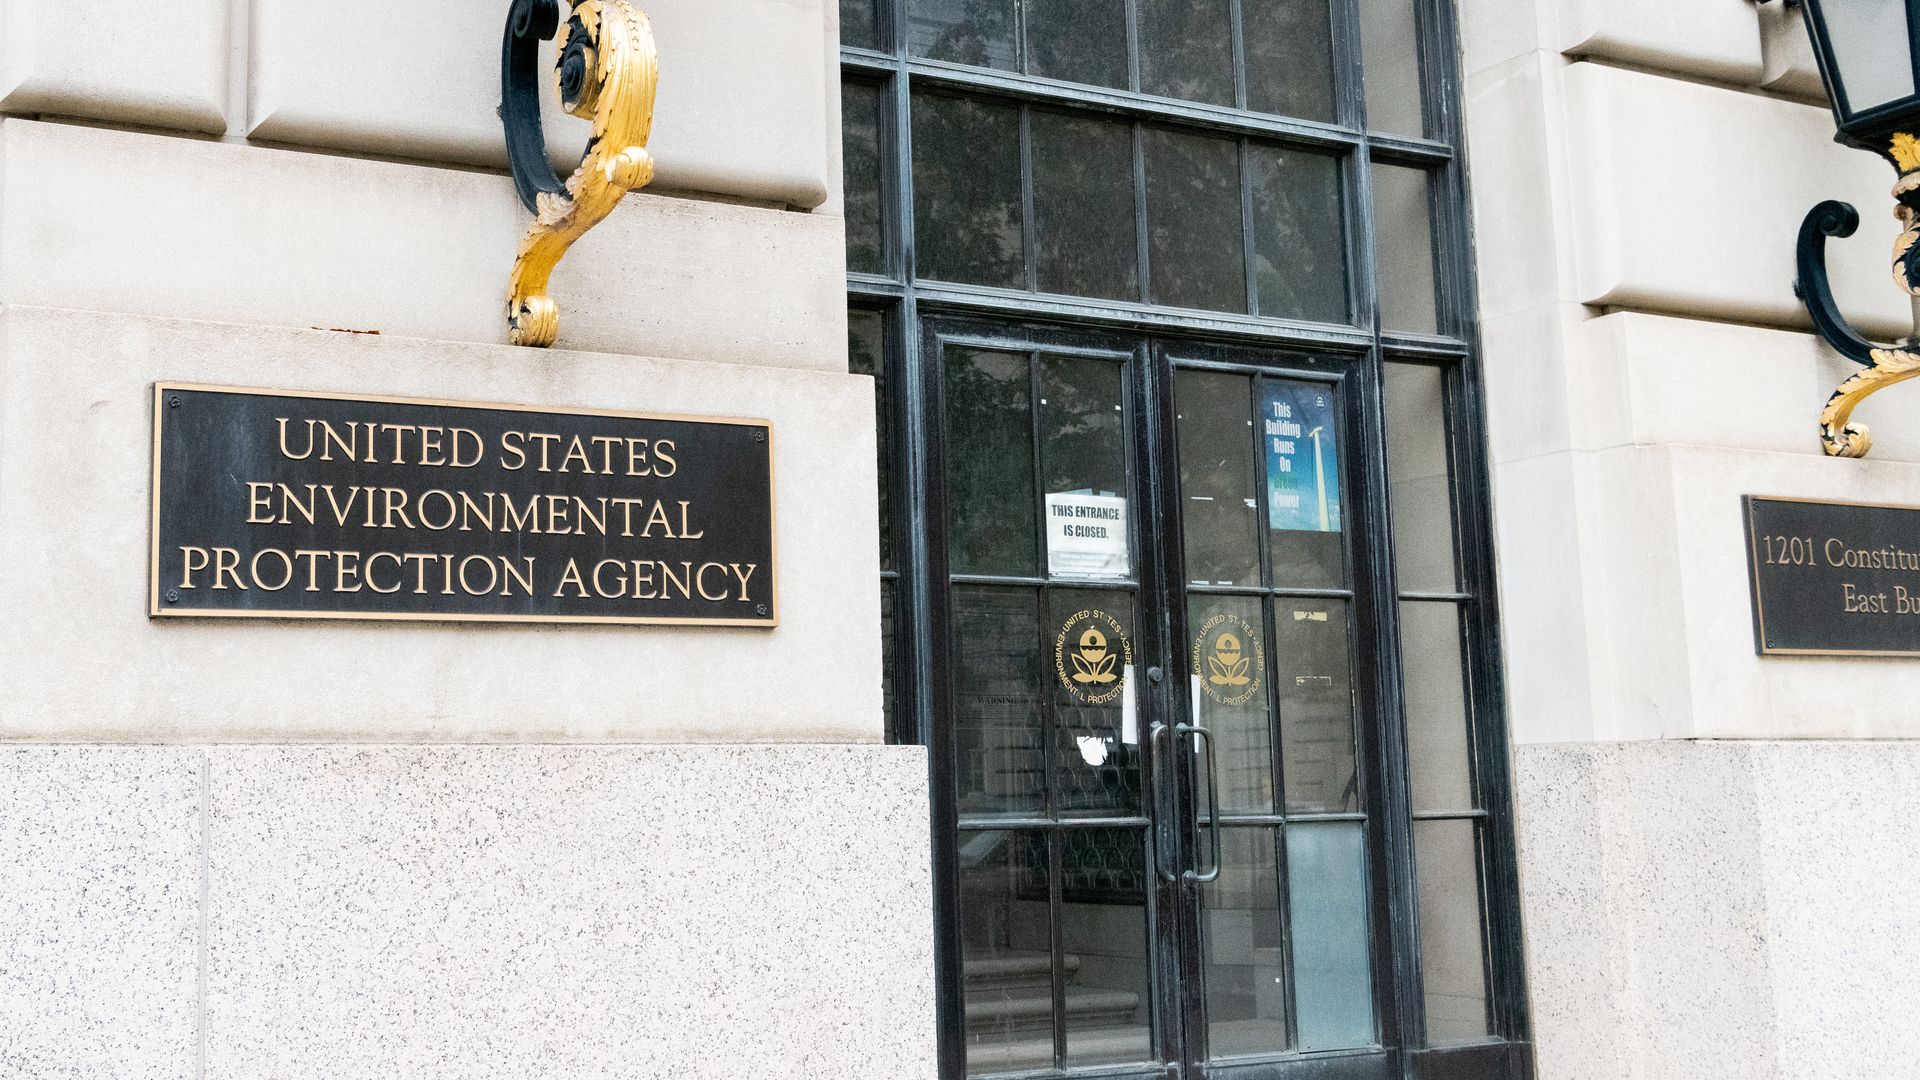 Photo of a set of doors to a building with a sign that says "U.S. Environmental Protection Agency" on the exterior